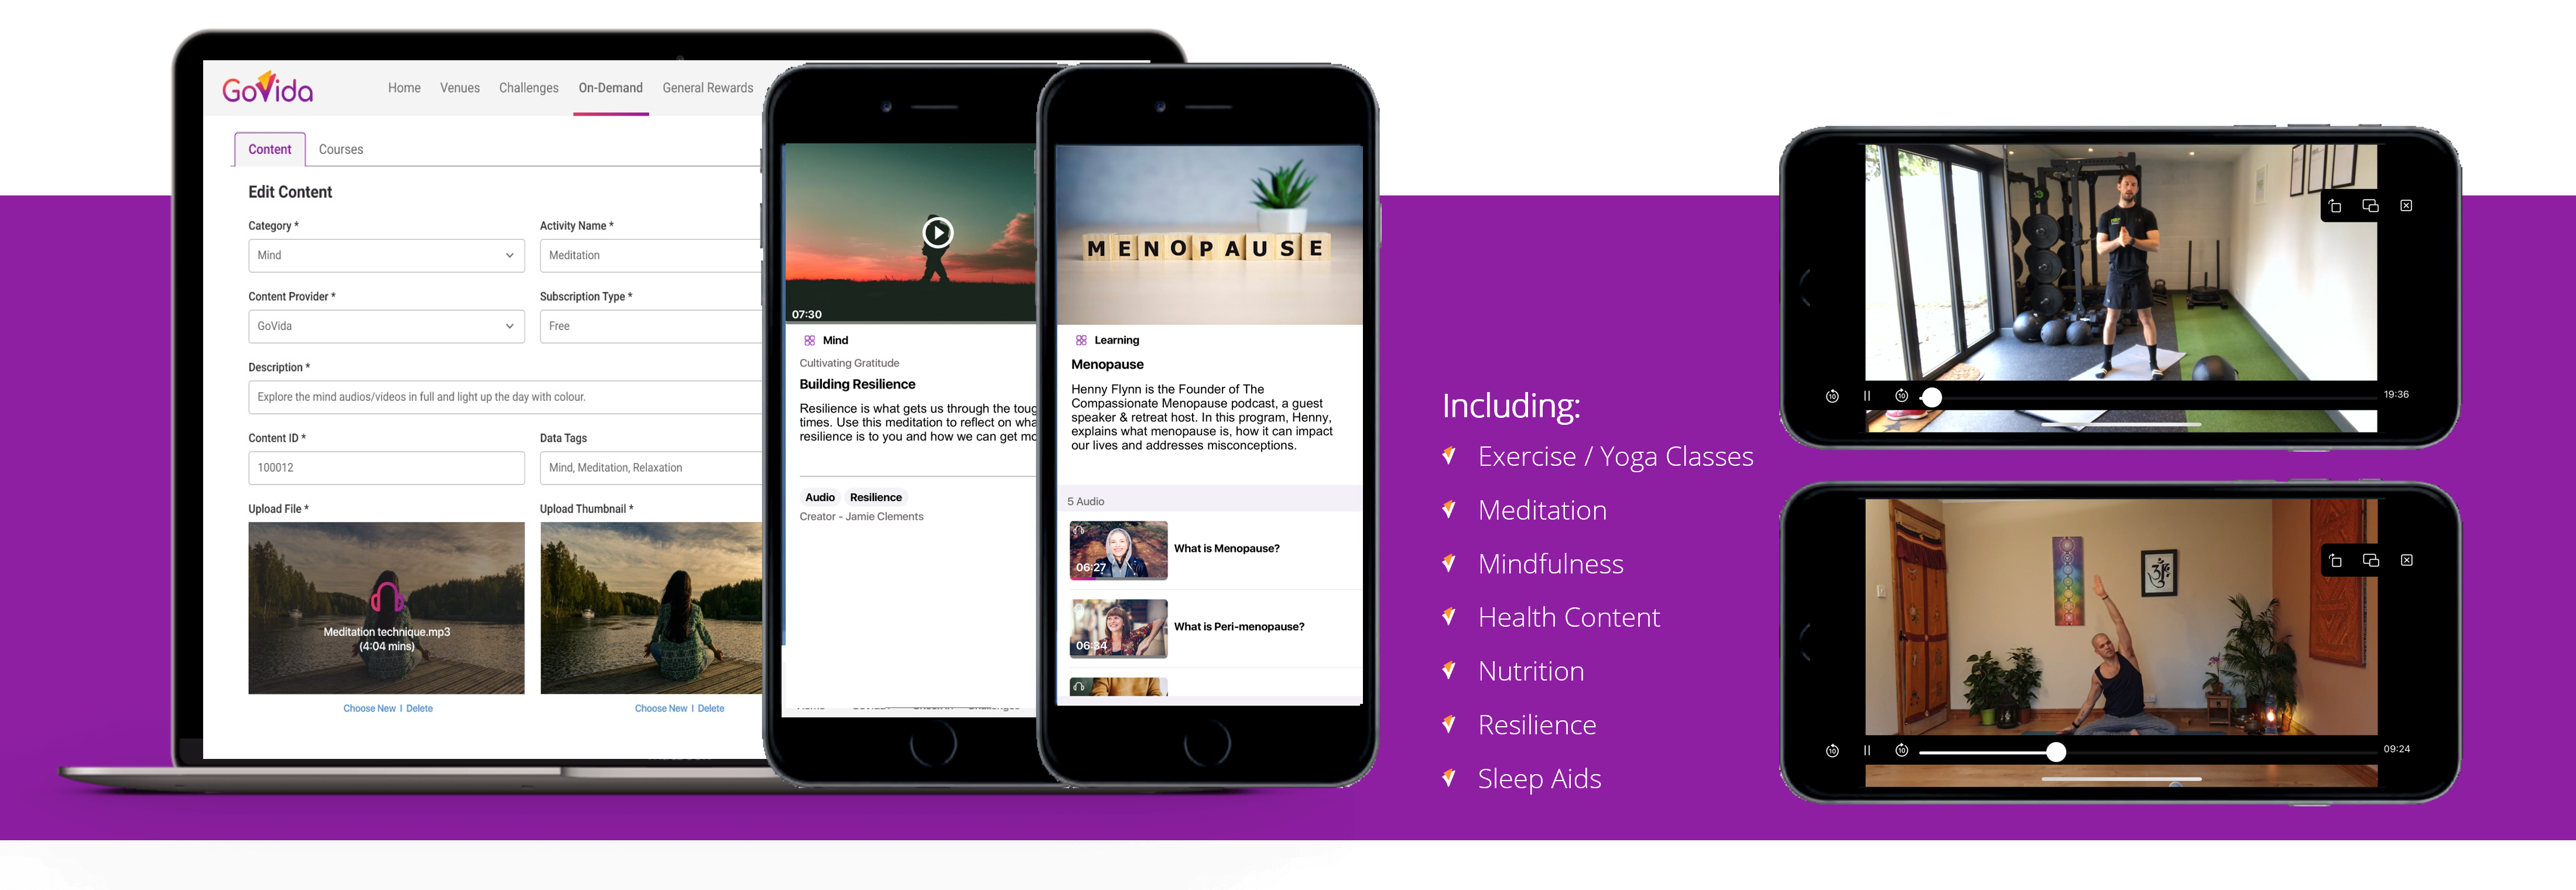 GoVida Software - GoVida+ (On Demand) - Users can explore our extensive library of programs in meditation, emotional intelligence, performance, exercise, etc and earn points as they go.